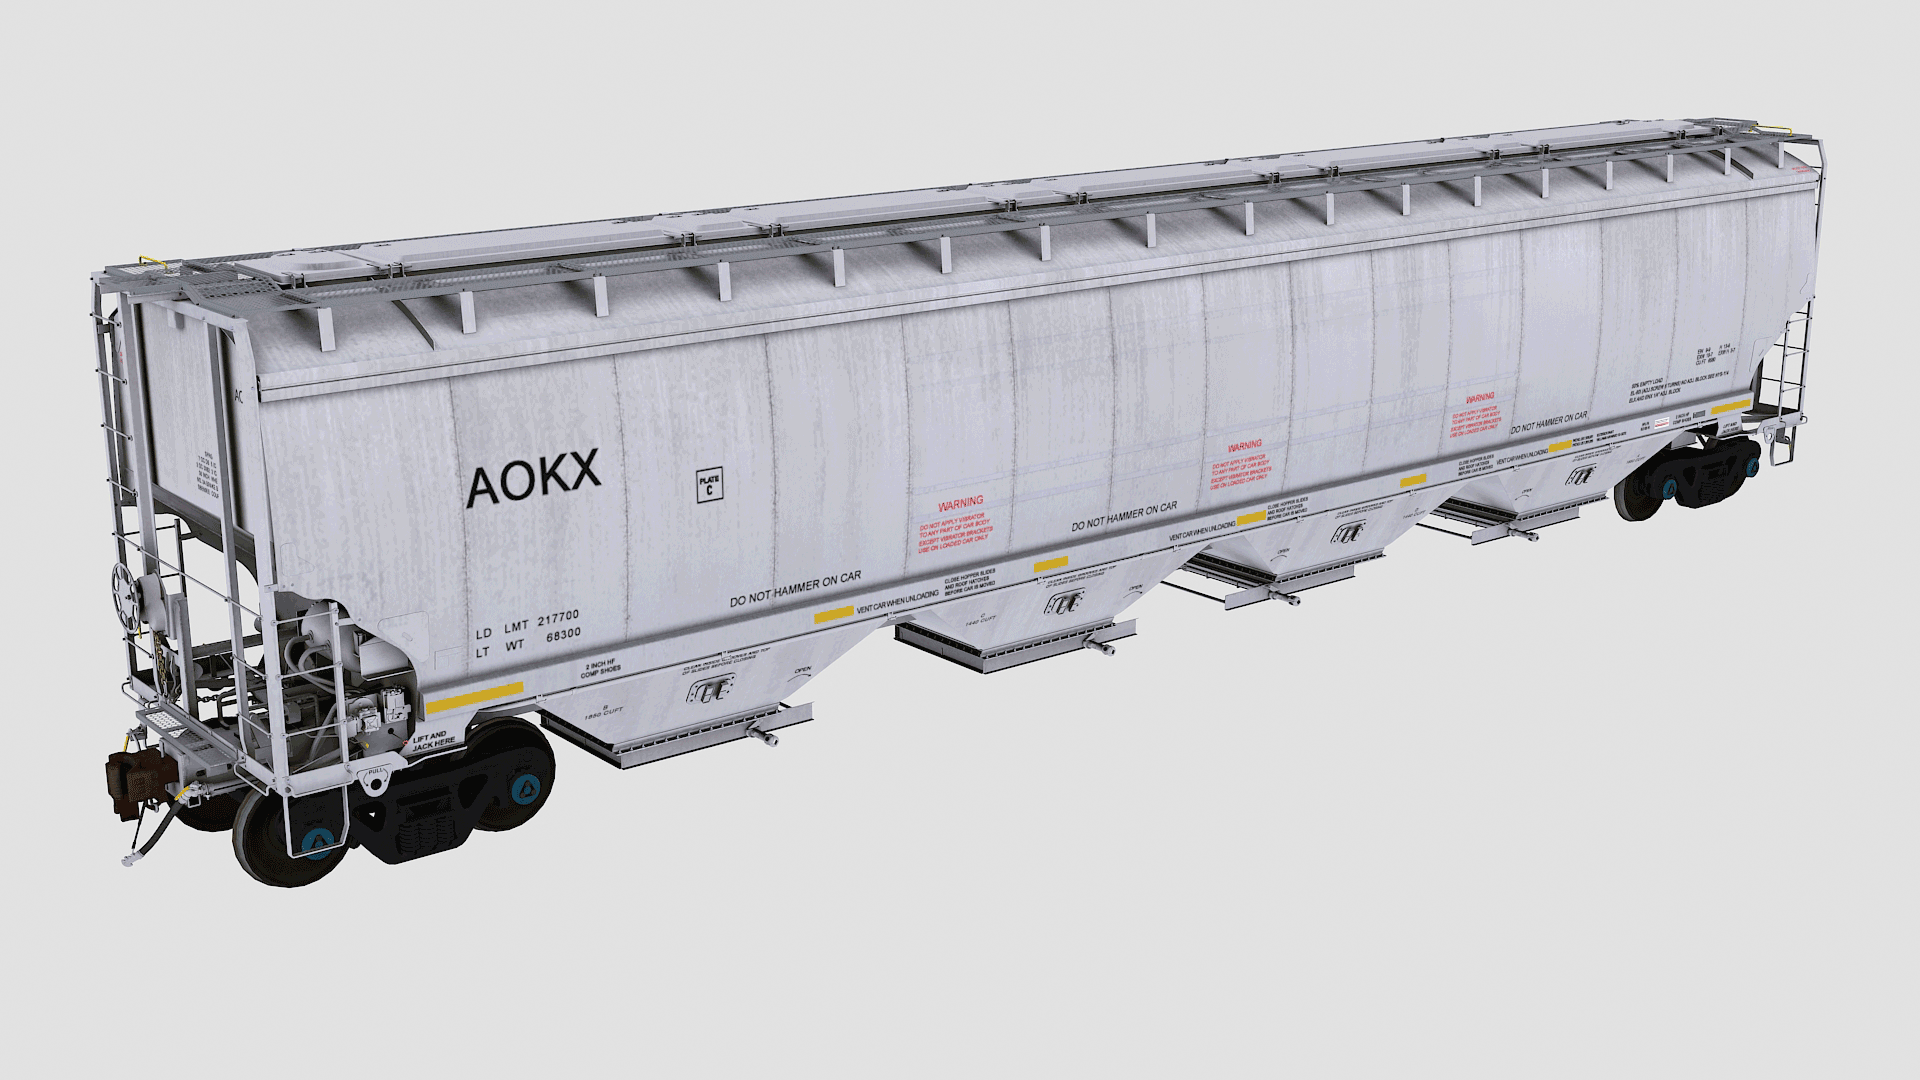 The Aokx green brier covered hopper